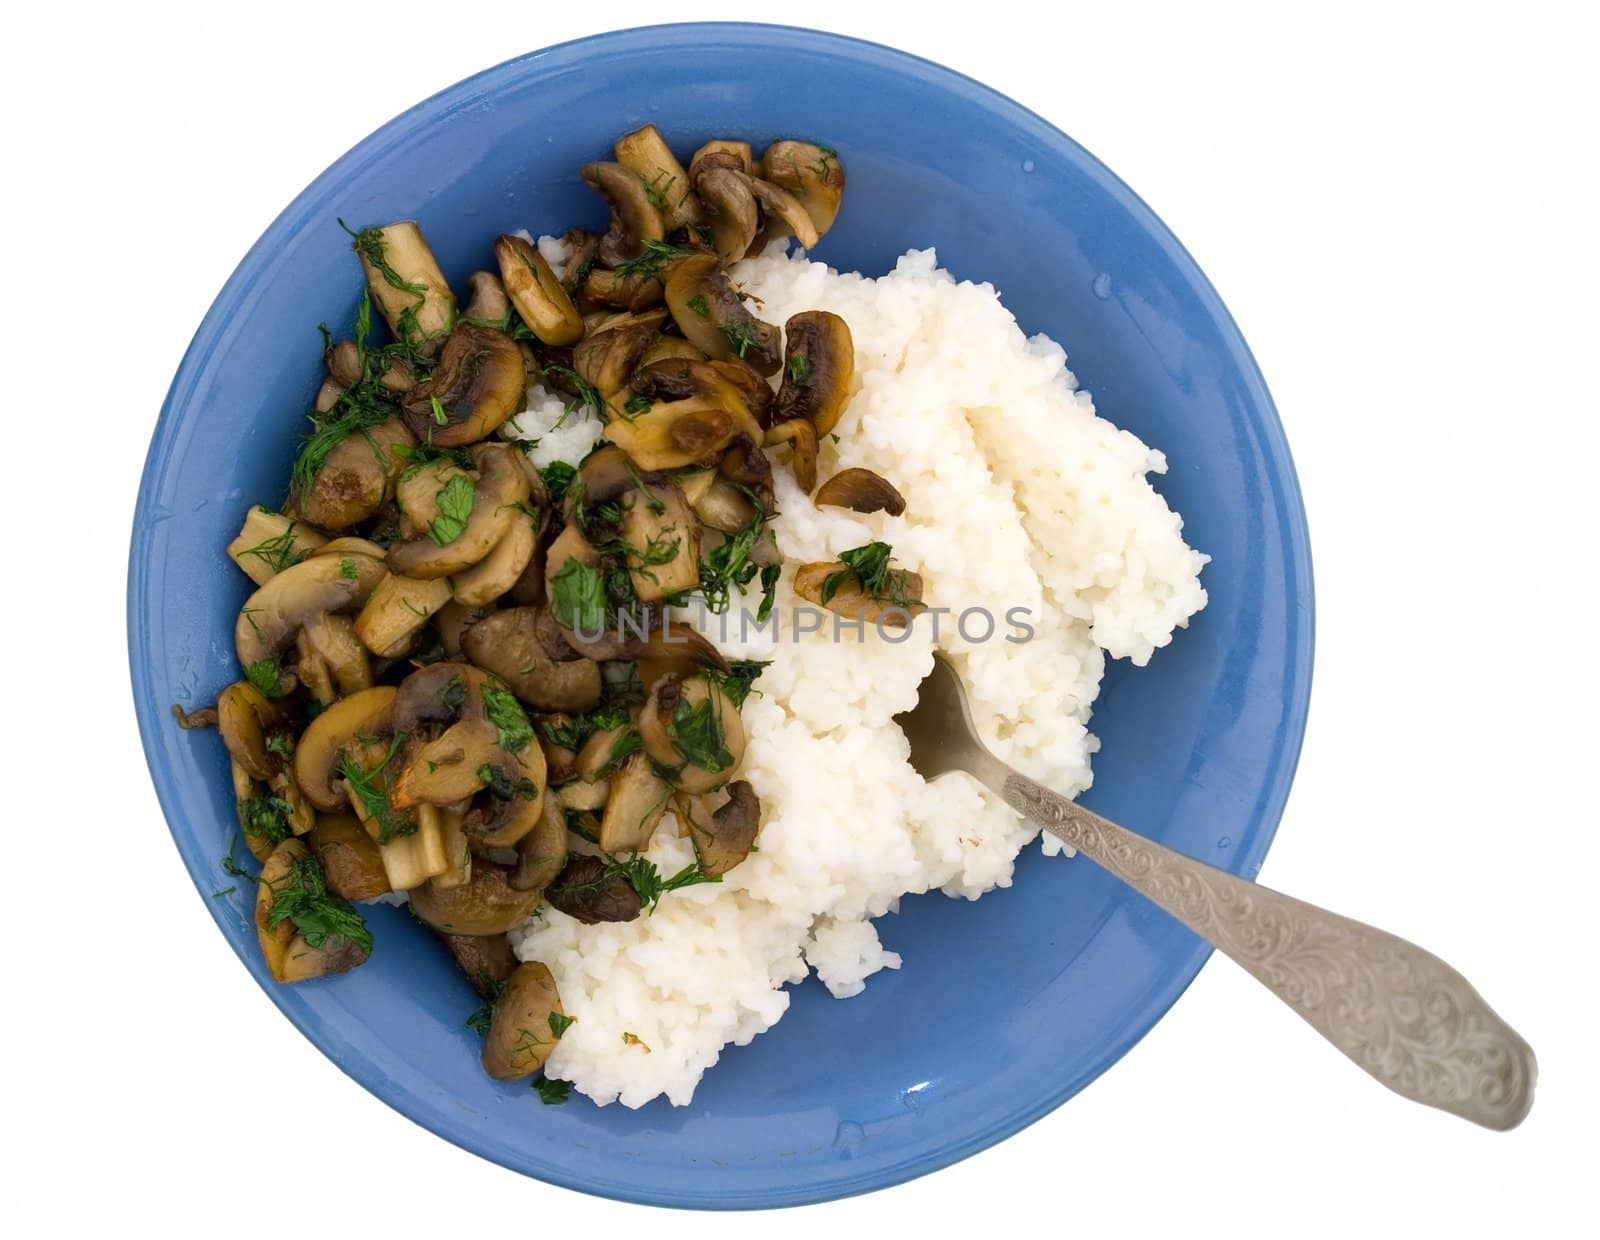 Champignons and rice on a blue plate on a white background.